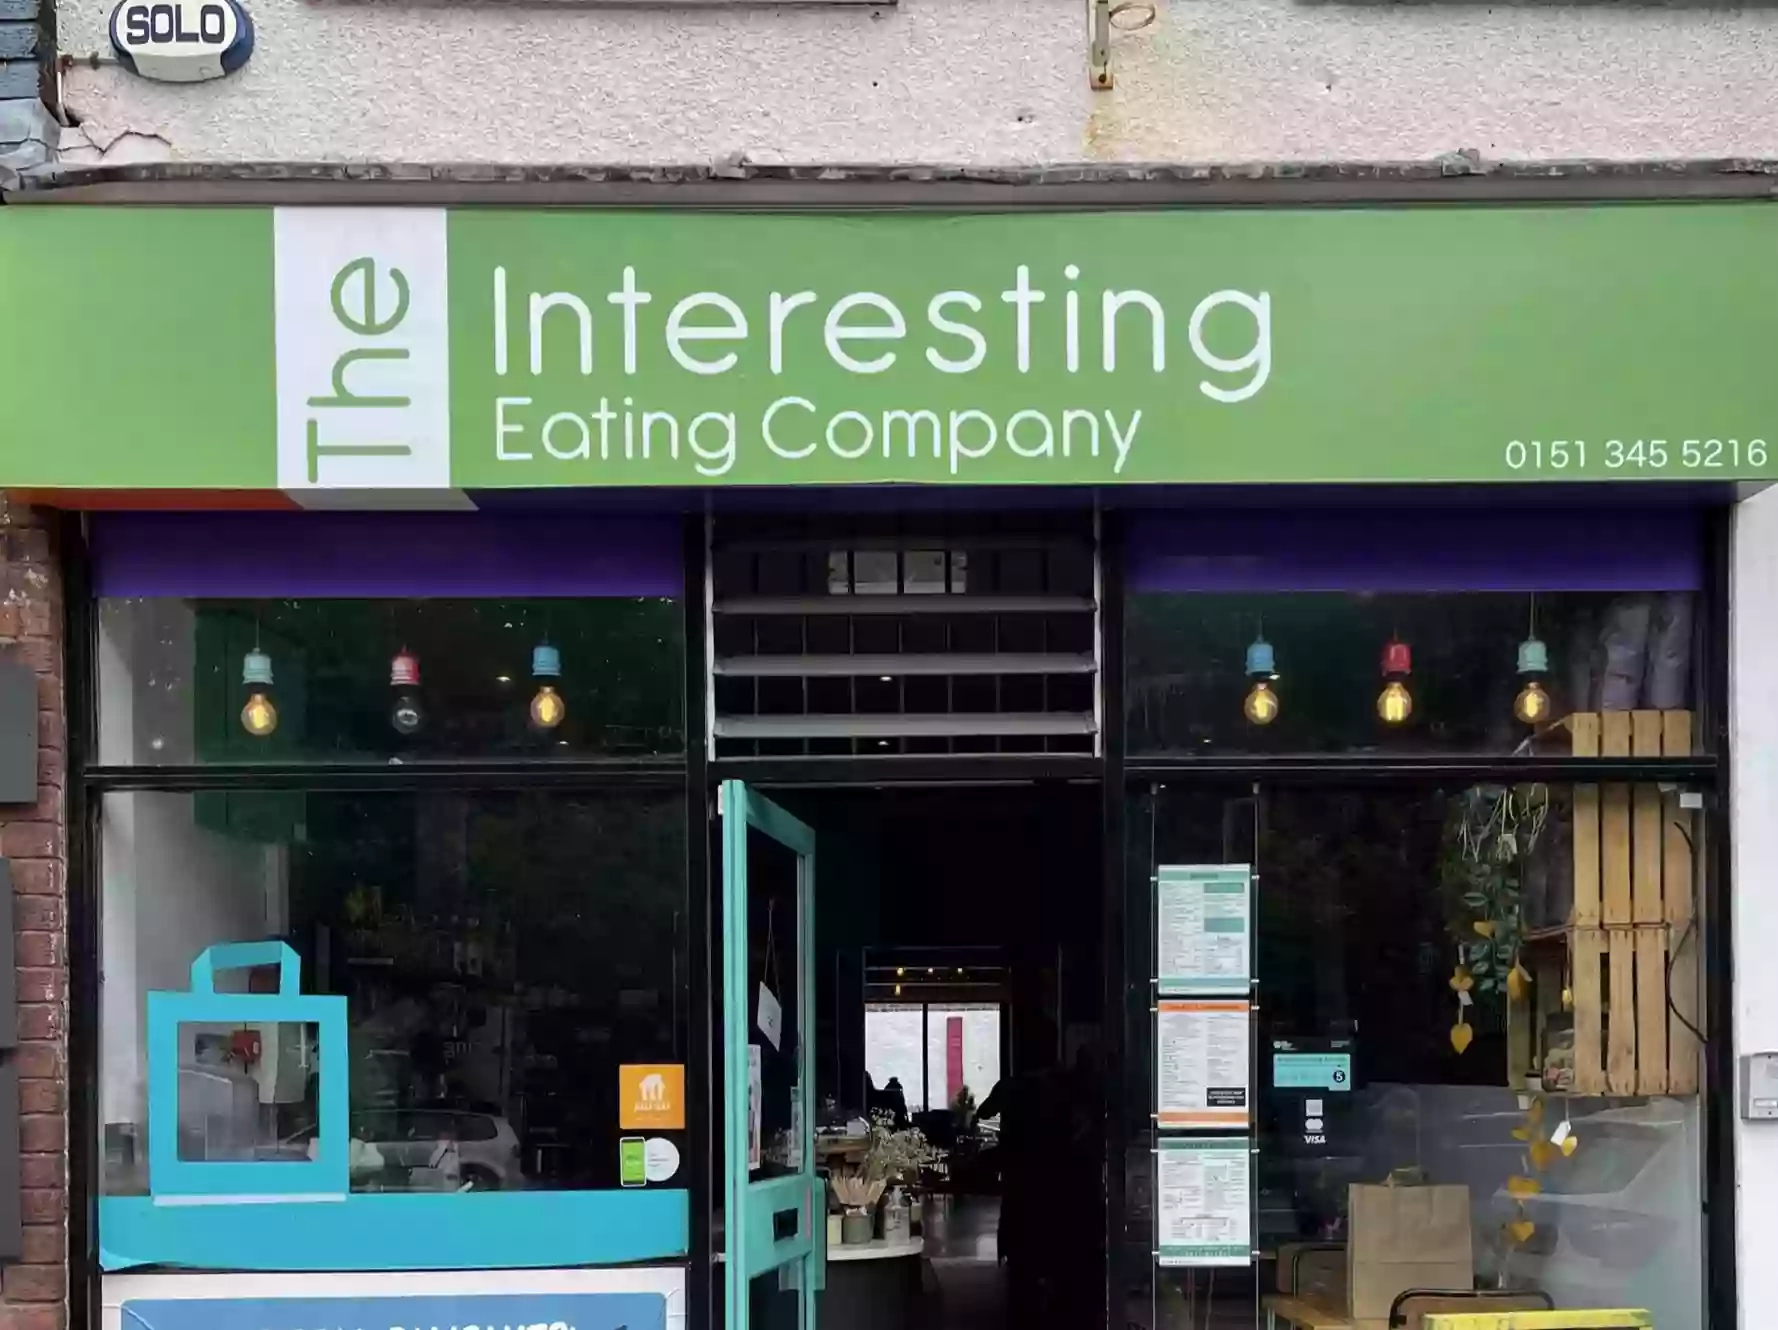 The Interesting Eating Co